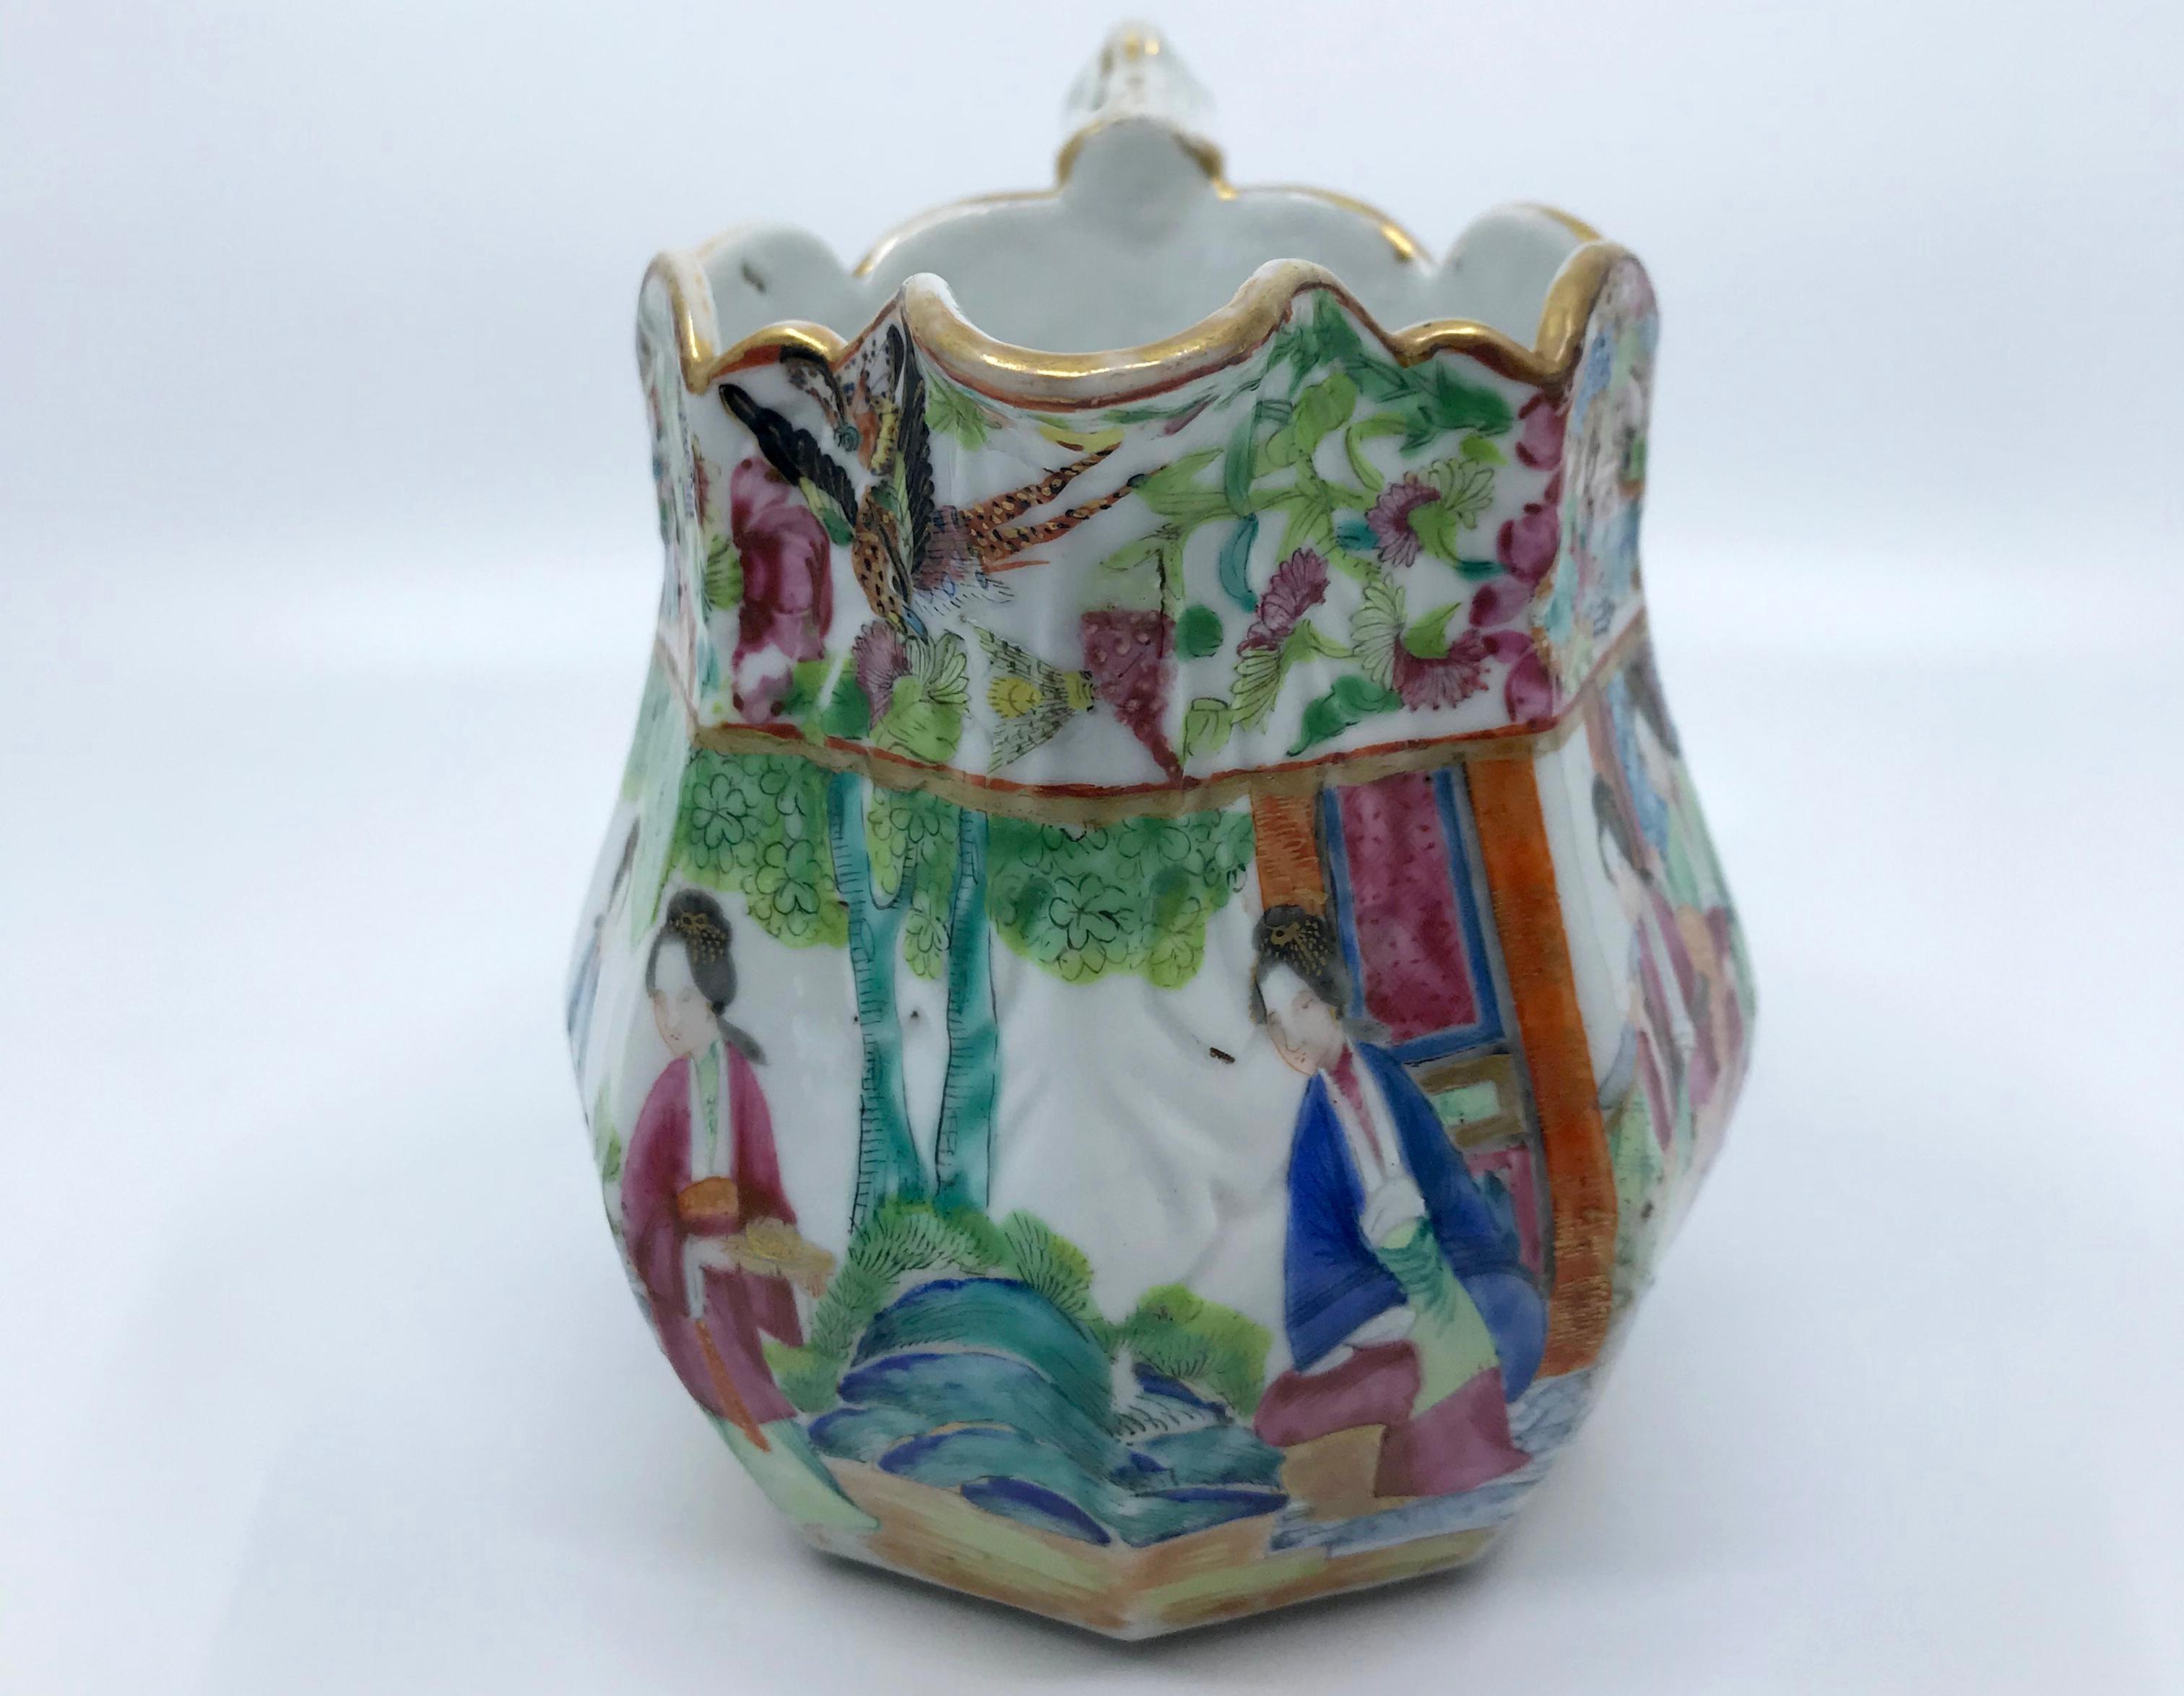 Rose Mandarin Chinese porcelain pitcher. Vibrantly hued and gilt painted Chinese Export pitcher in pinks and blues and greens with lobed rim and articulated handle. China, mid 19th century. 
Dimensions: 6.25